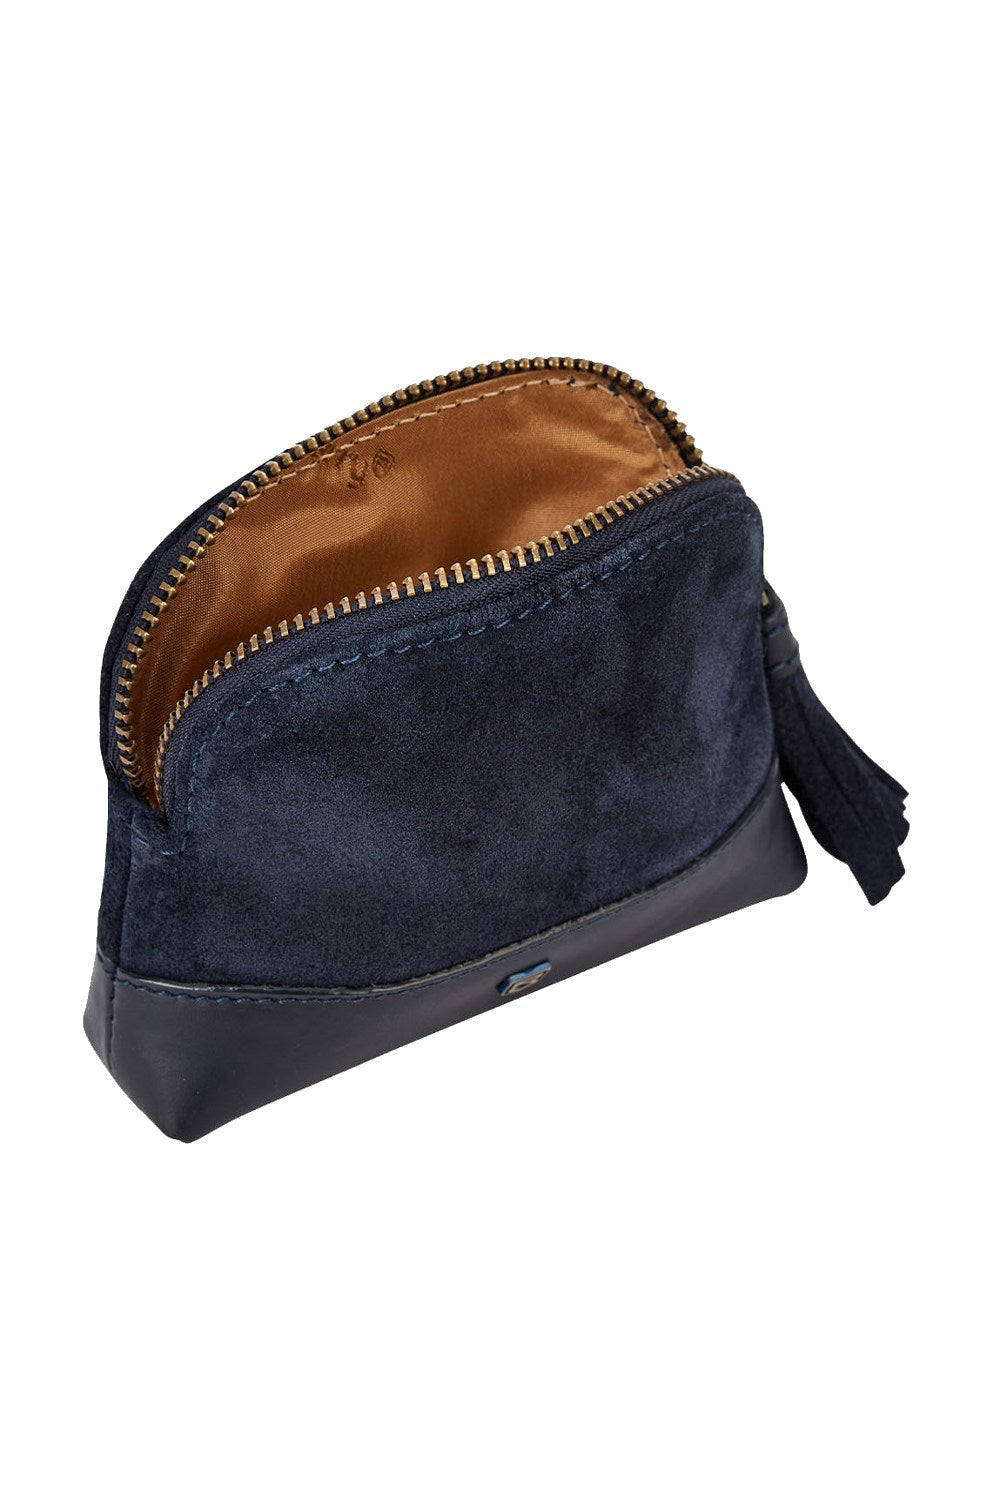 Dubarry Richmond Suede Purse in French Navy